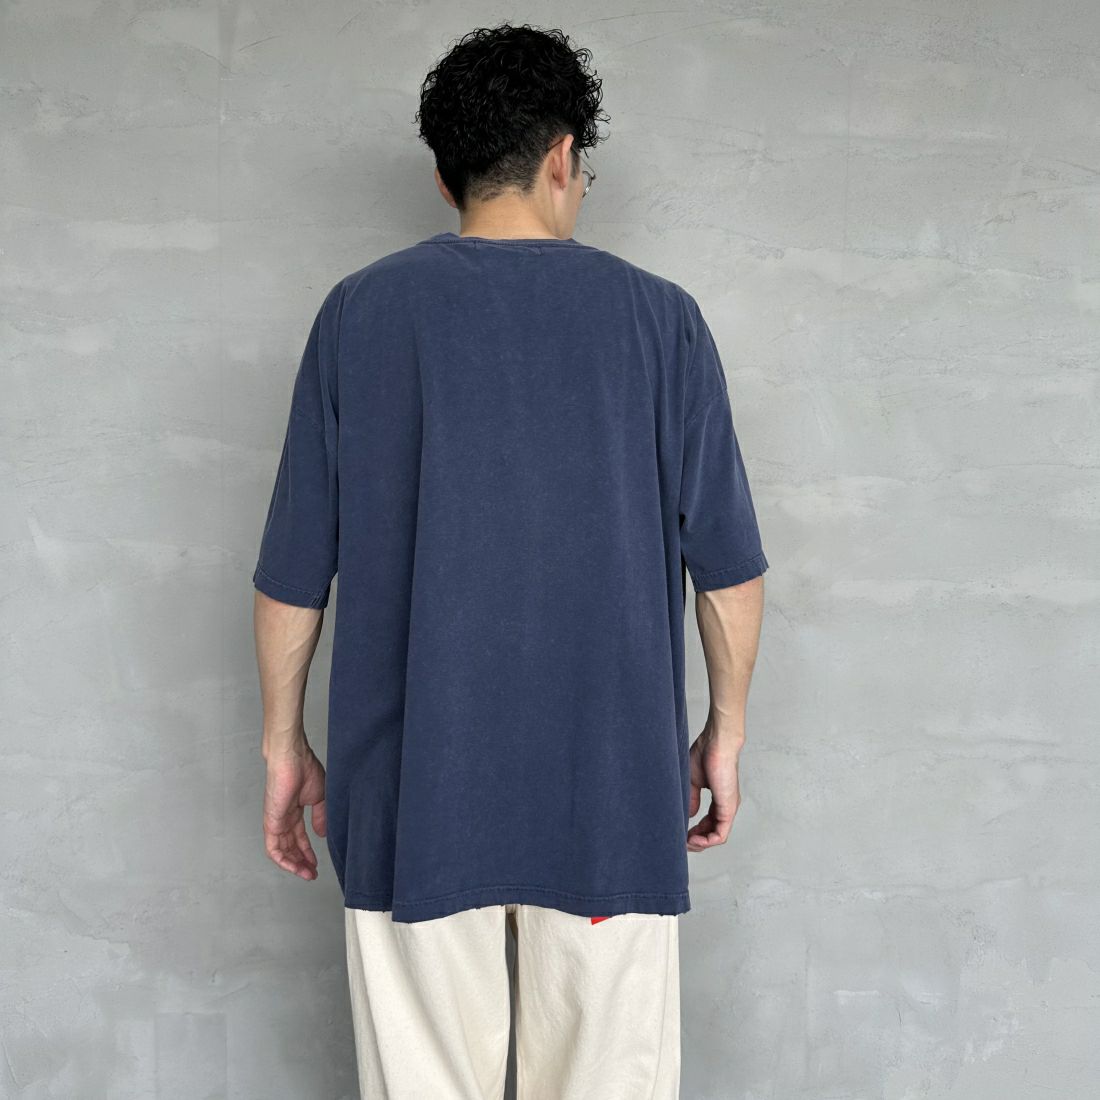 REMI RELIEF [レREMI RELIEF [レミレリーフ] 別注 ビッグプリントTシャツ MICHIGAN [RN26349325-JF] NAVY &&モデル身長：168cm 着用サイズ：M&&ミレリーフ] 別注 ビッグプリントTシャツ MICHIGAN [RN26349325-JF] NAVY